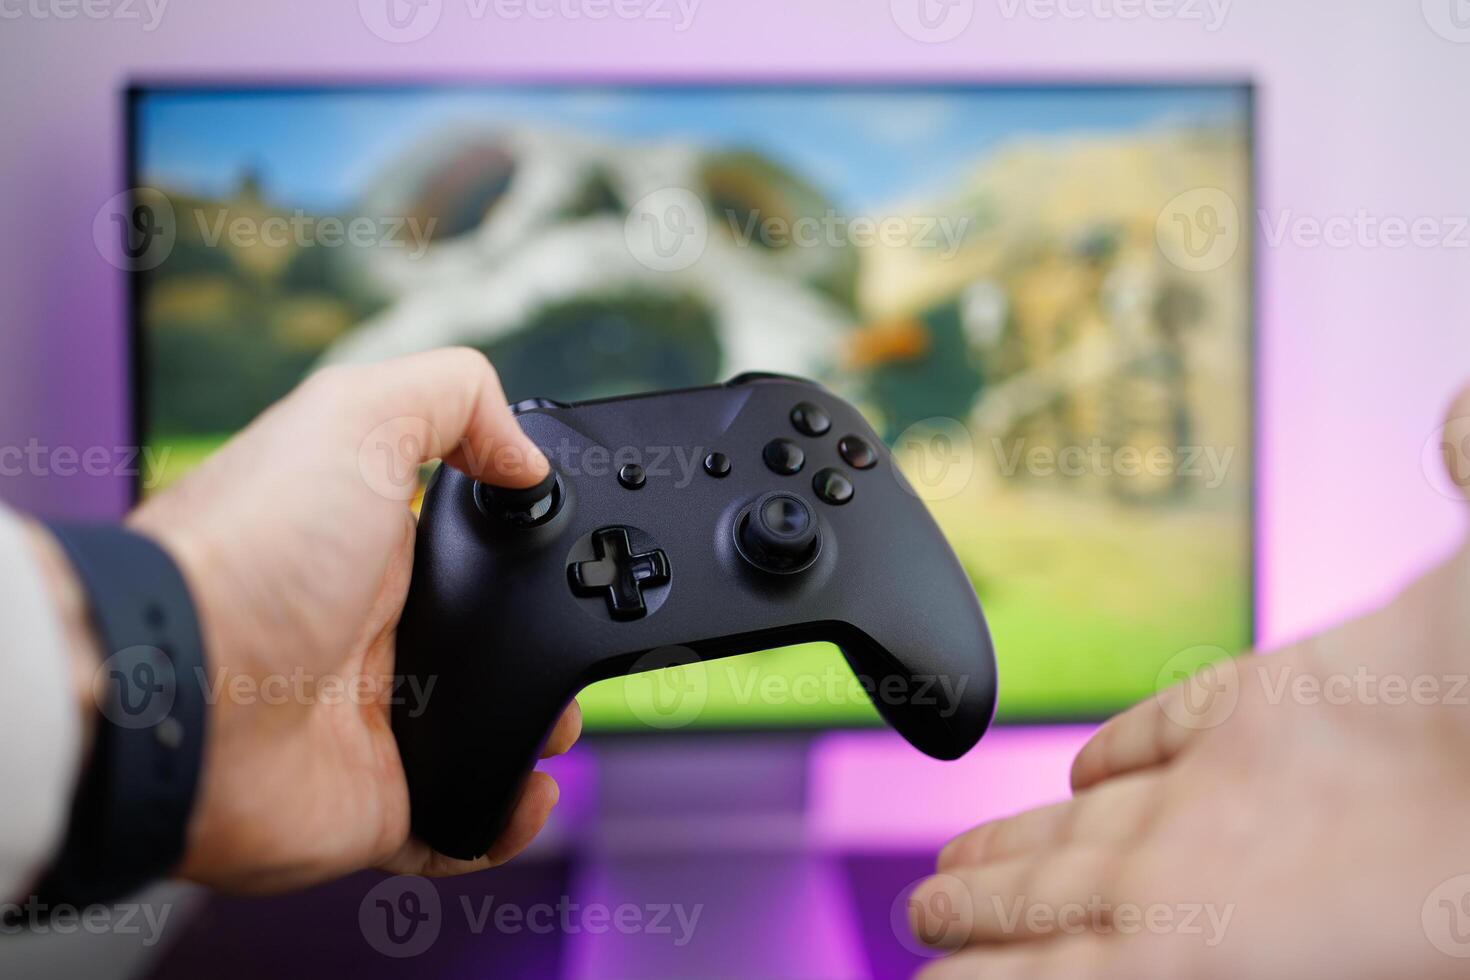 Holding a game gamepad in one hand and using the other hand to point at the monitor that's in the background. game gamepad in hand photo